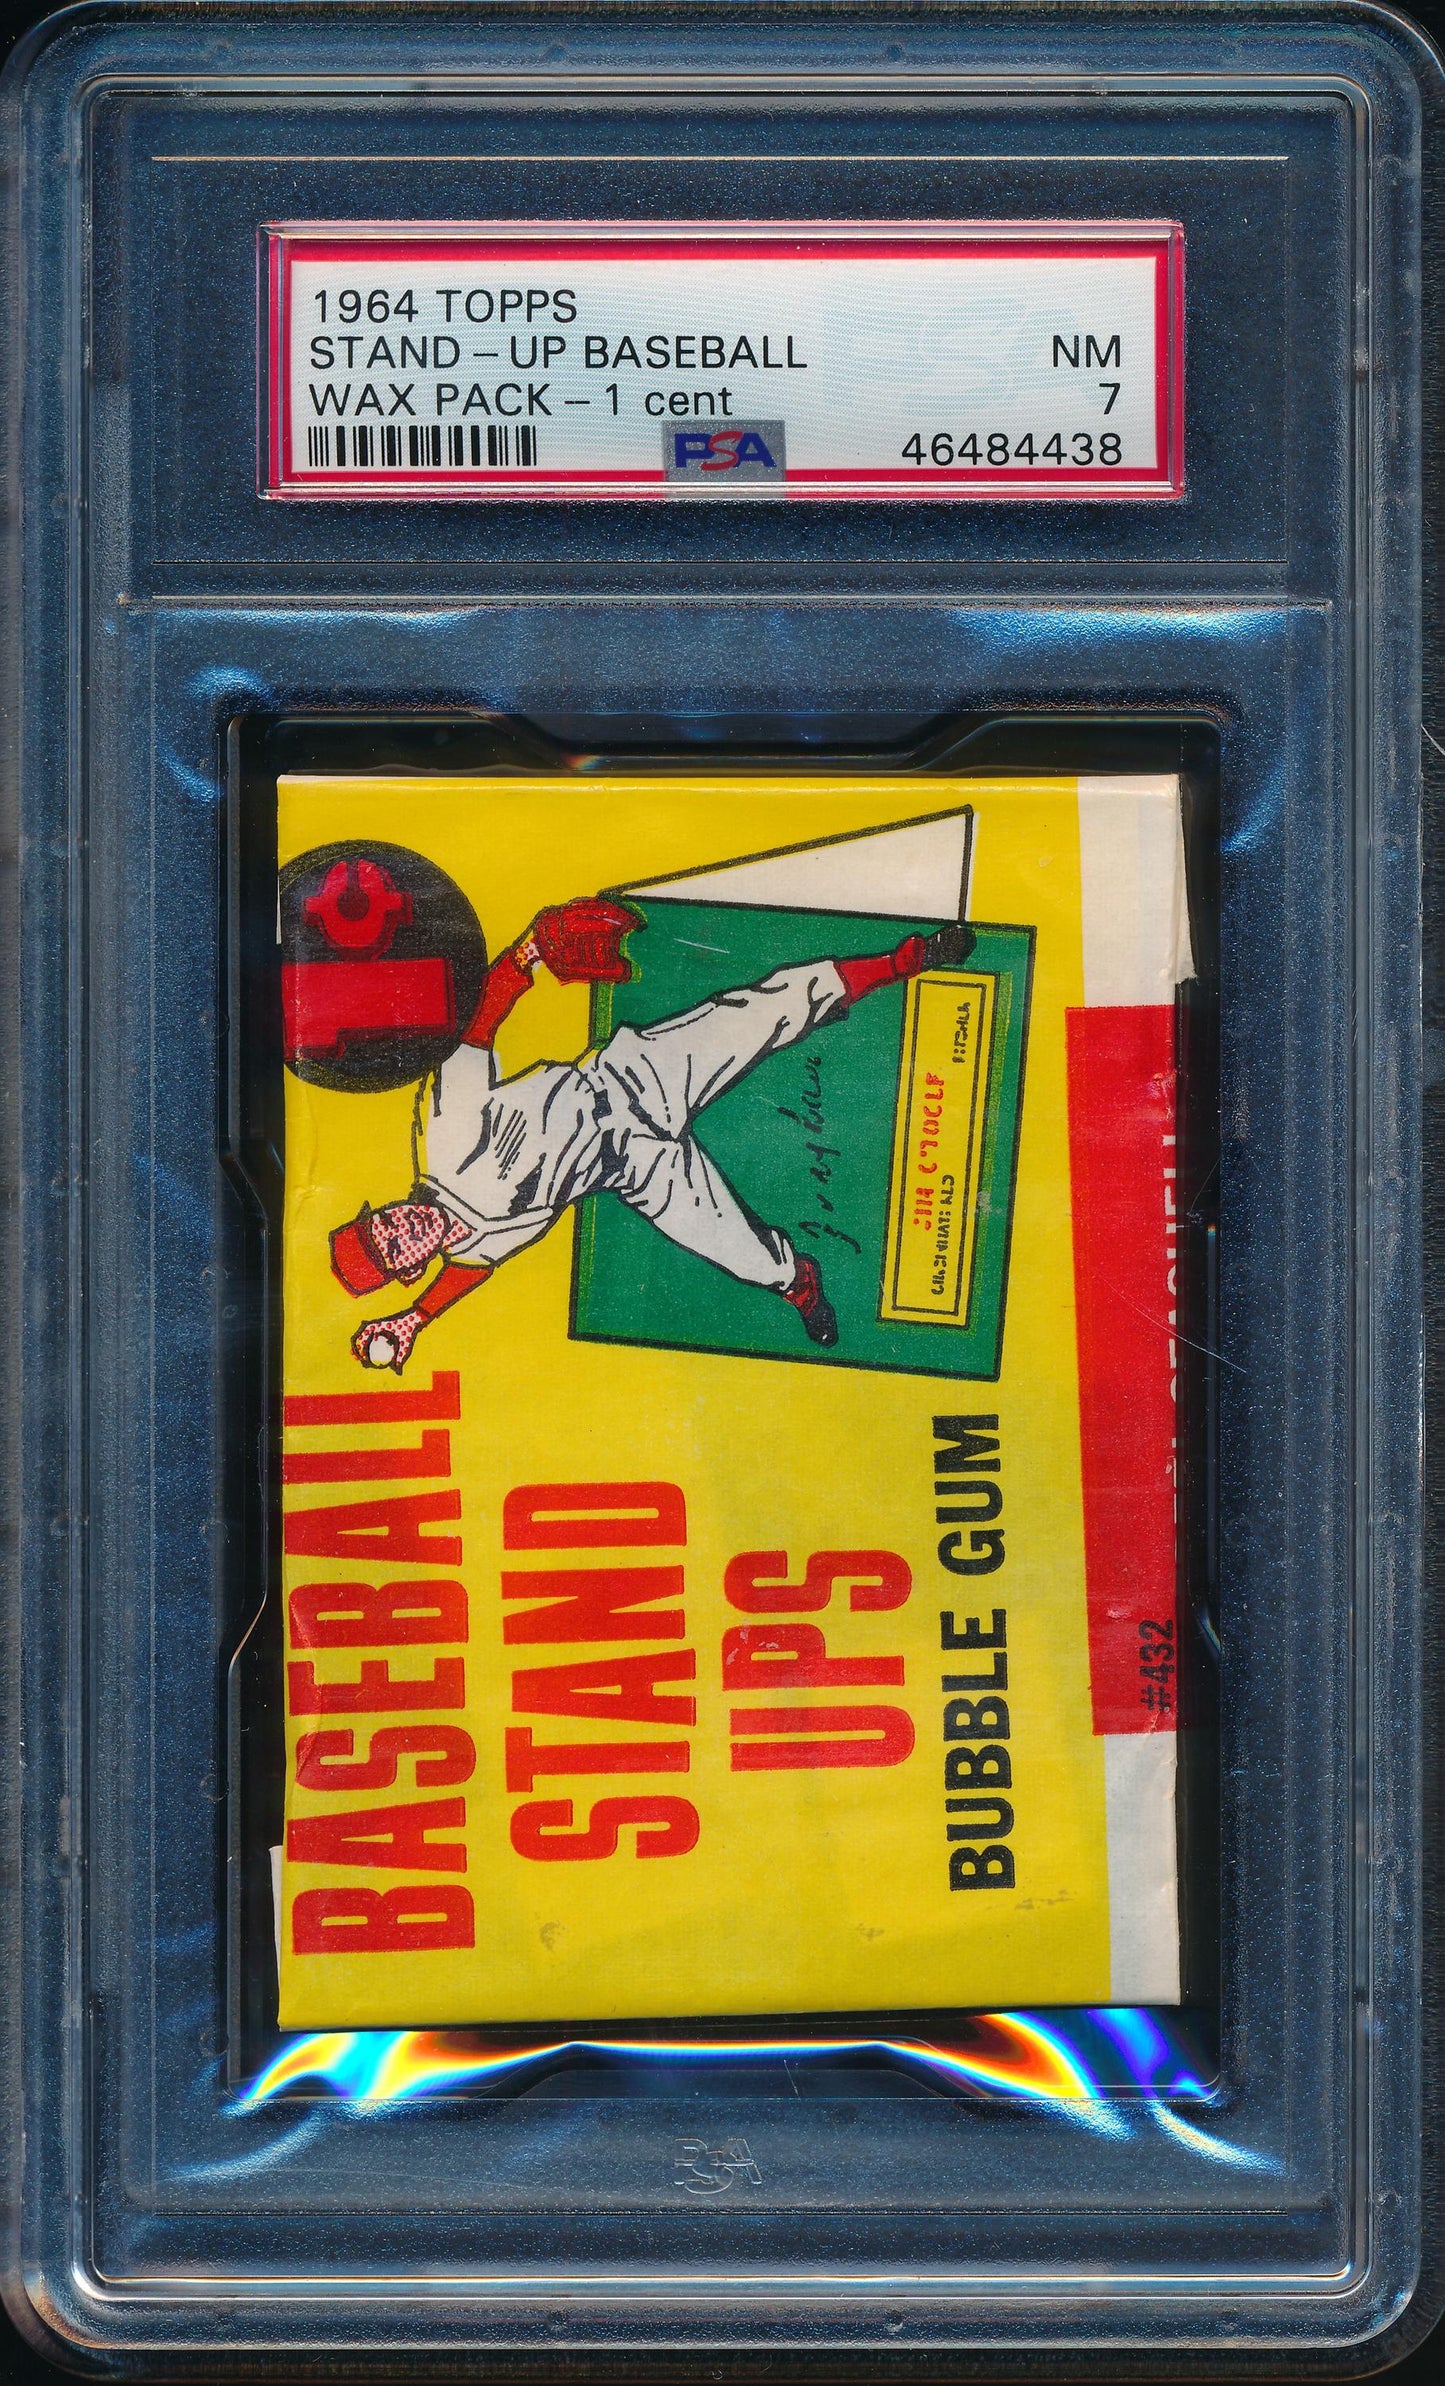 1964 Topps Baseball Stand Up Unopened 1 Cent Wax Pack PSA 7